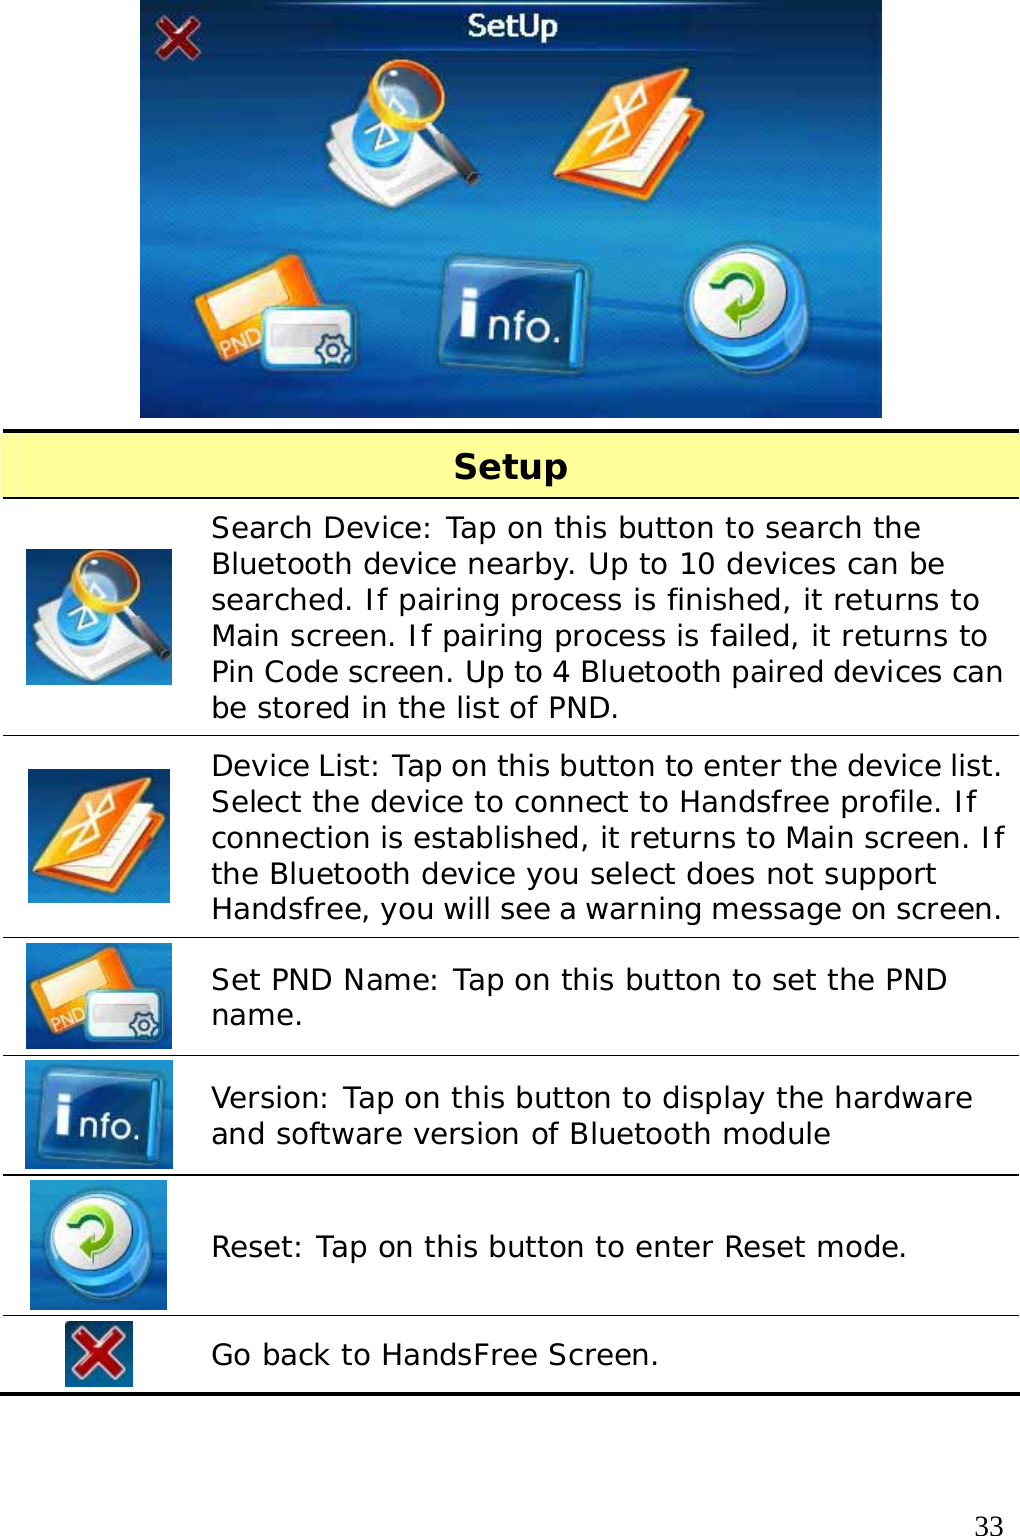  33  Setup  Search Device: Tap on this button to search the Bluetooth device nearby. Up to 10 devices can be searched. If pairing process is finished, it returns to Main screen. If pairing process is failed, it returns to Pin Code screen. Up to 4 Bluetooth paired devices can be stored in the list of PND.  Device List: Tap on this button to enter the device list. Select the device to connect to Handsfree profile. If connection is established, it returns to Main screen. If the Bluetooth device you select does not support Handsfree, you will see a warning message on screen.  Set PND Name: Tap on this button to set the PND name.  Version: Tap on this button to display the hardware and software version of Bluetooth module  Reset: Tap on this button to enter Reset mode.  Go back to HandsFree Screen.  